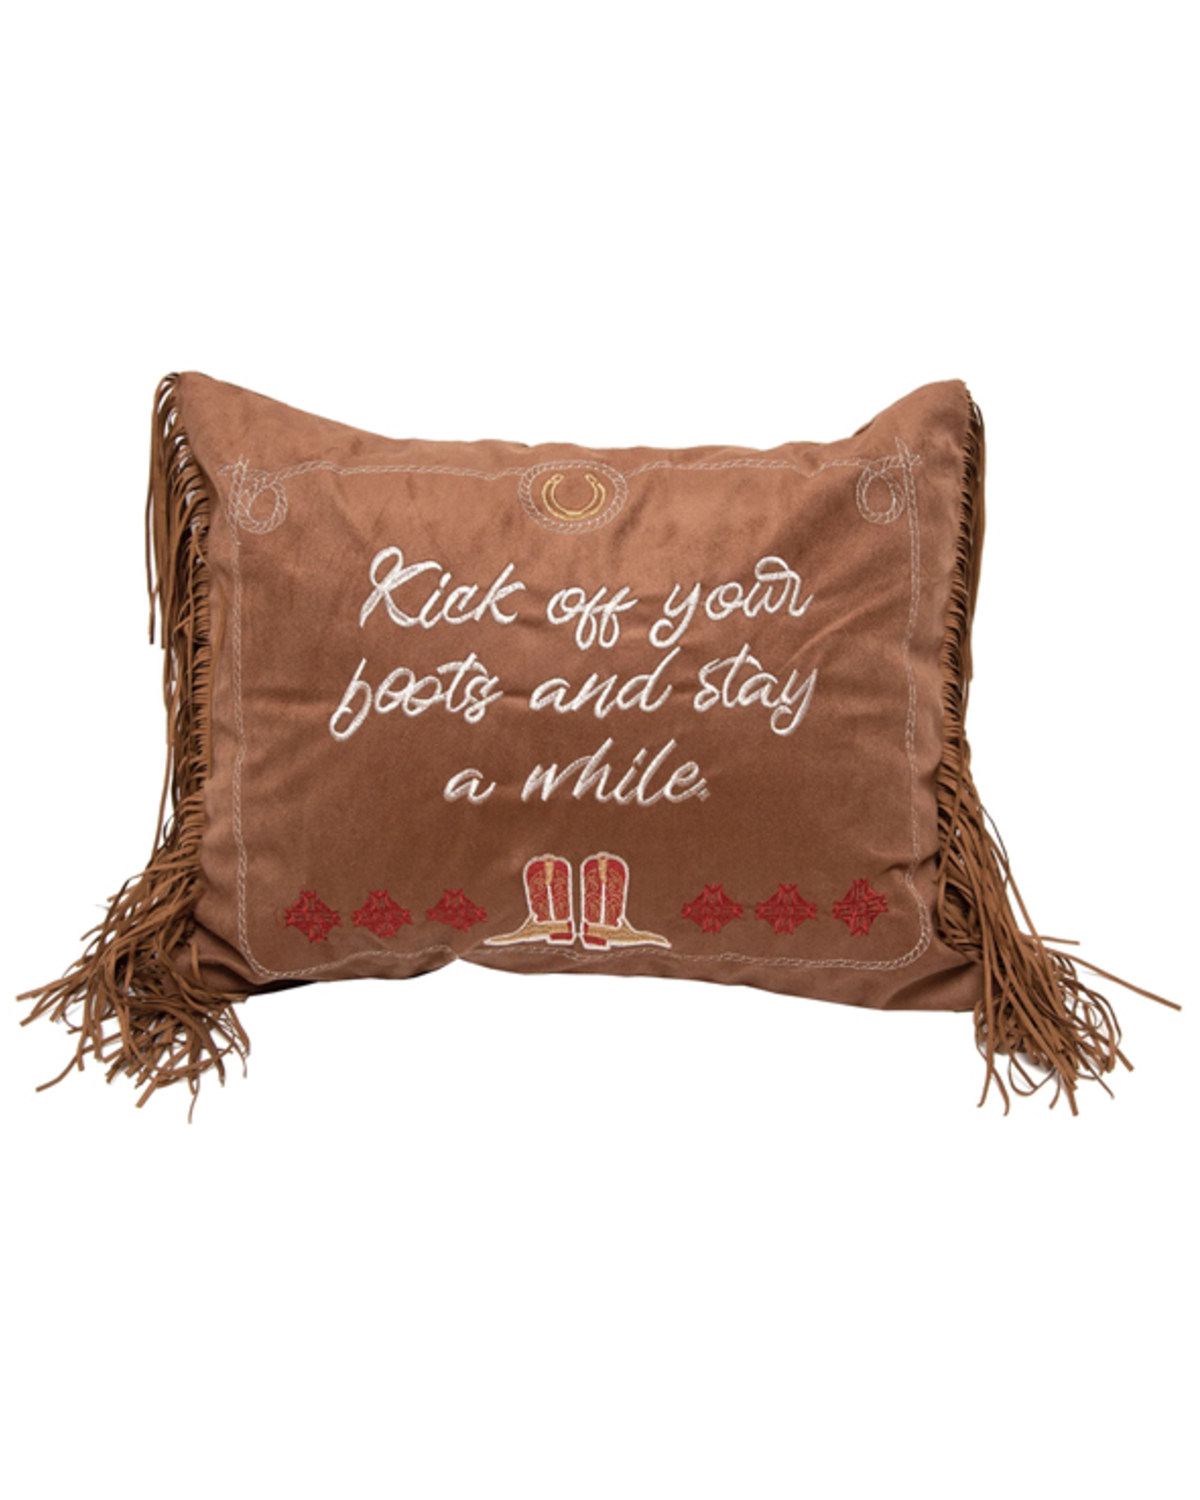 Carstens Home Kick Off Your Boots Embroidered Fringe Decorative Throw Pillow